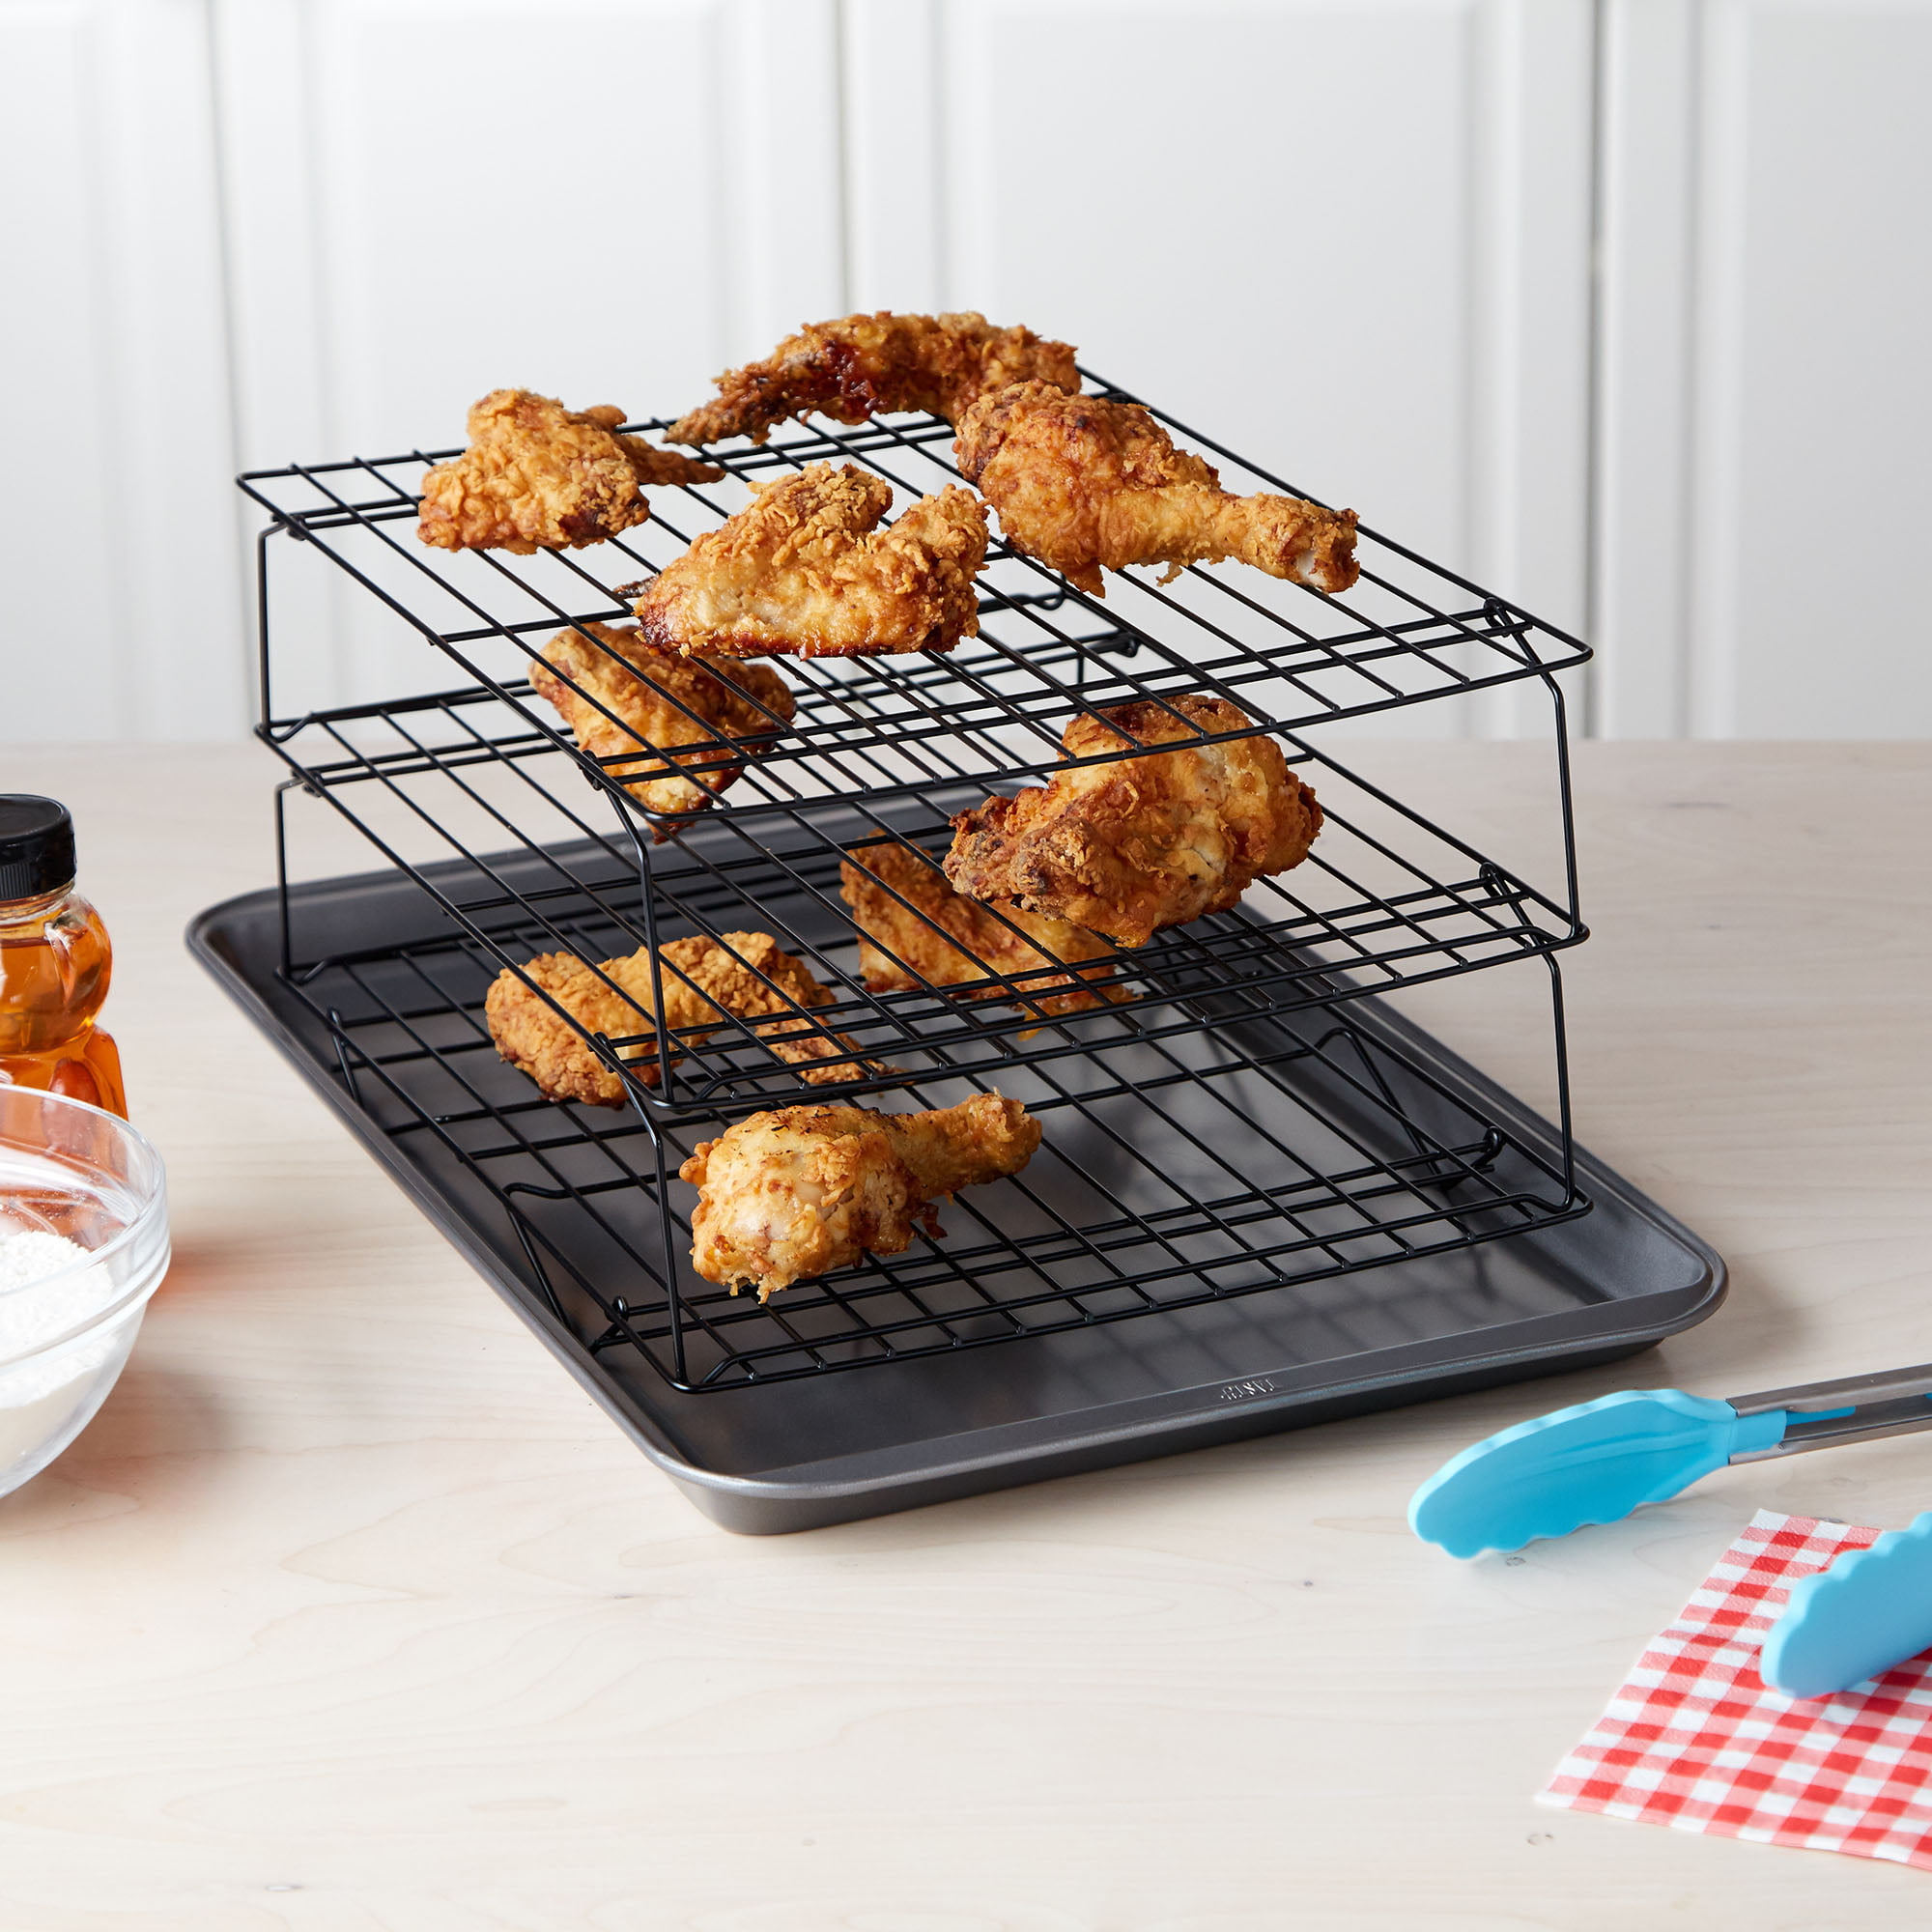 Nifty 3-Tier Cooling Rack – Non-Stick Coating, Wire Mesh Design, Dishwasher  Safe, Collapsible Kitchen Countertop Organizer, Use for Baking Cookies